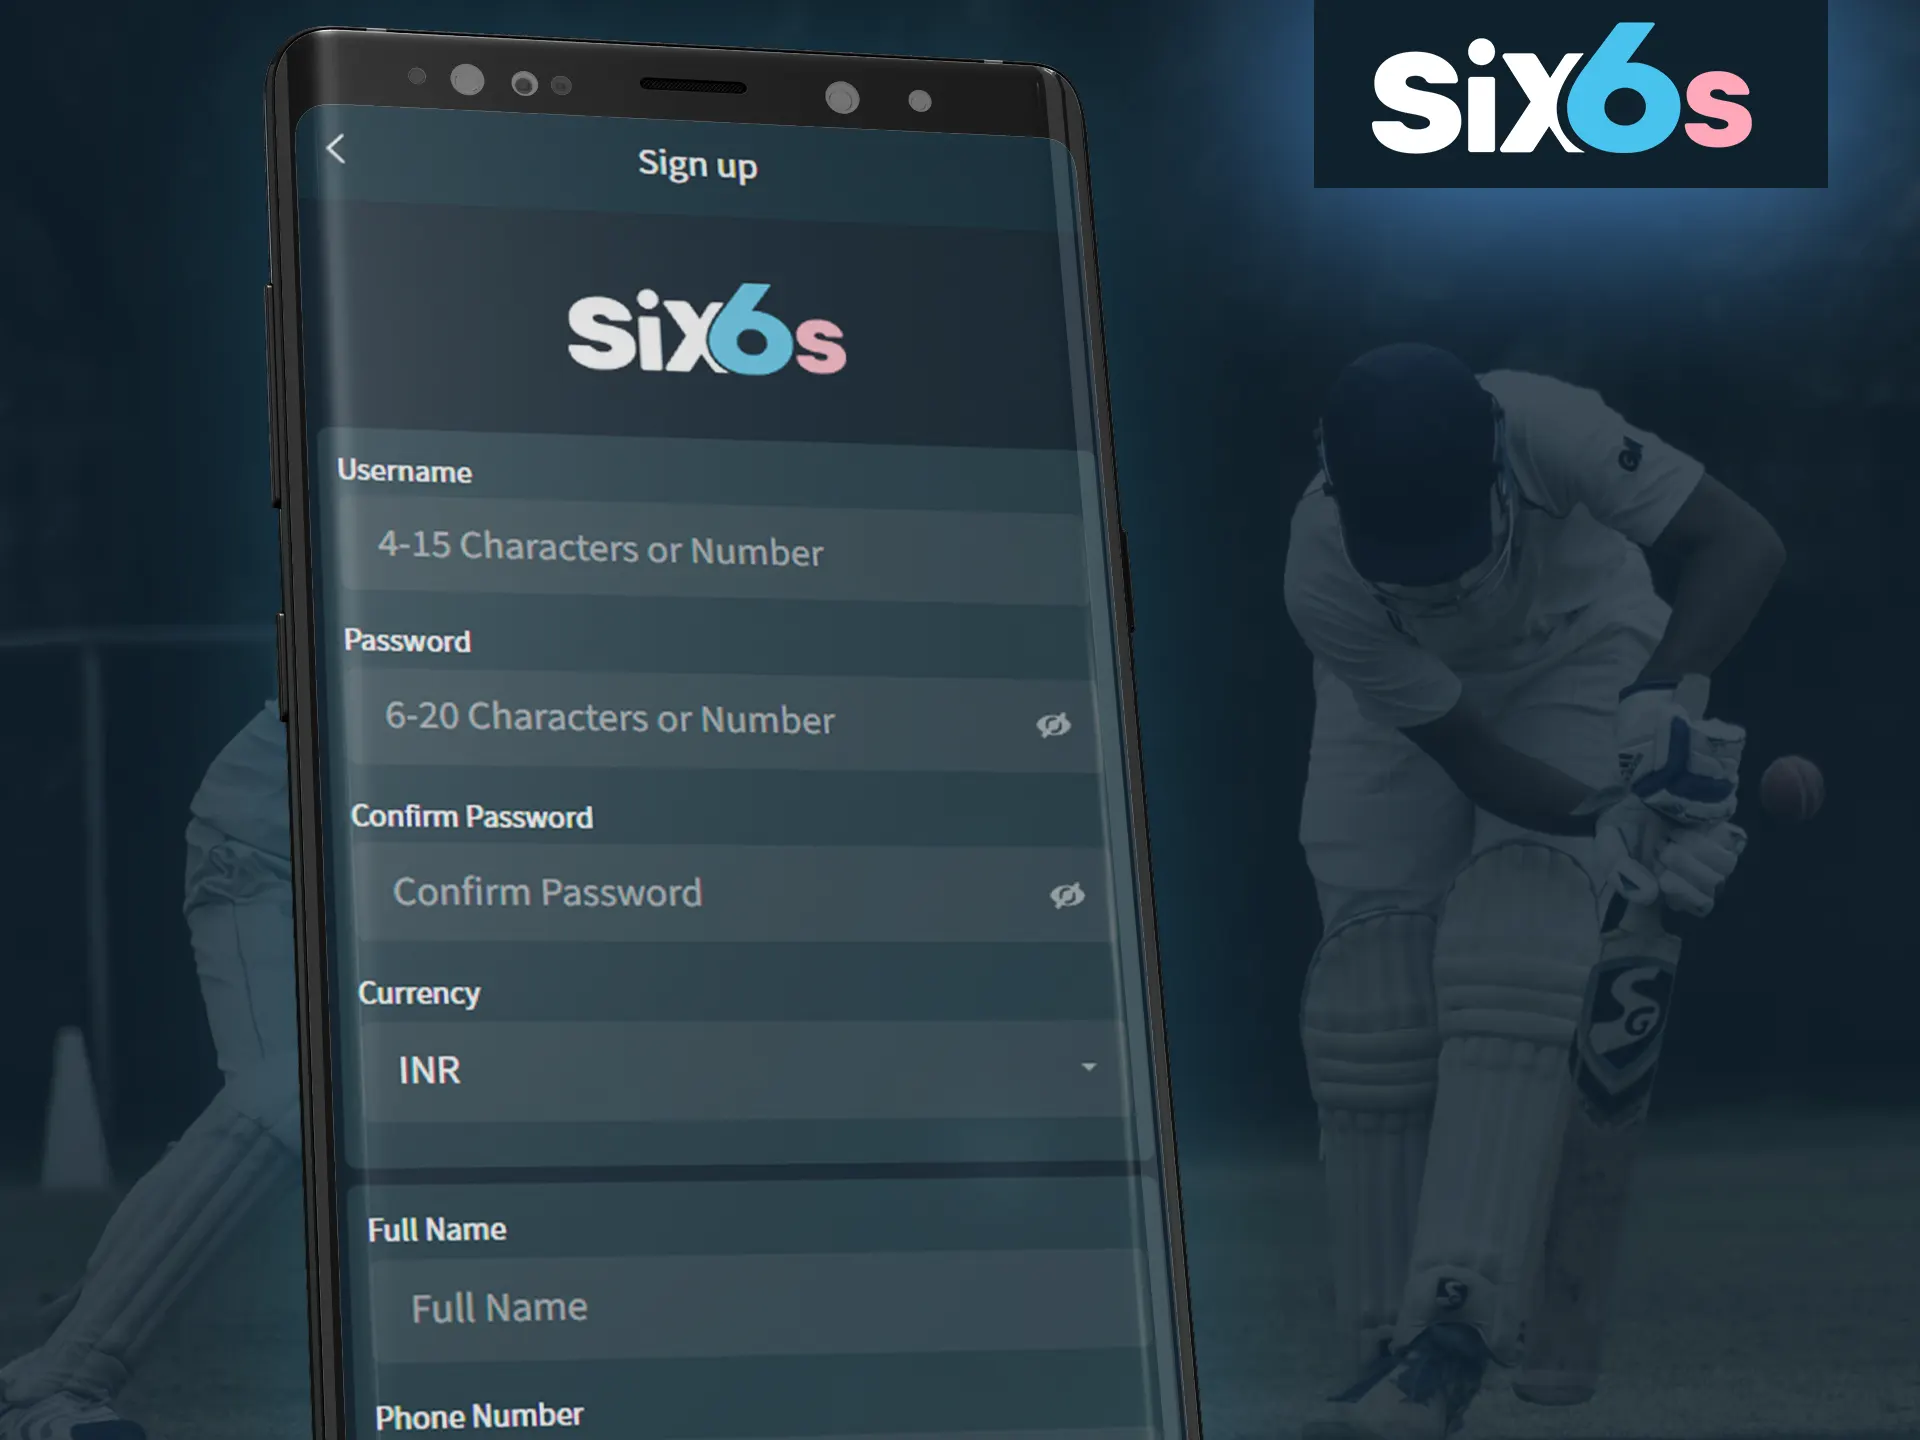 Complete a simple registration in the Six6s app.